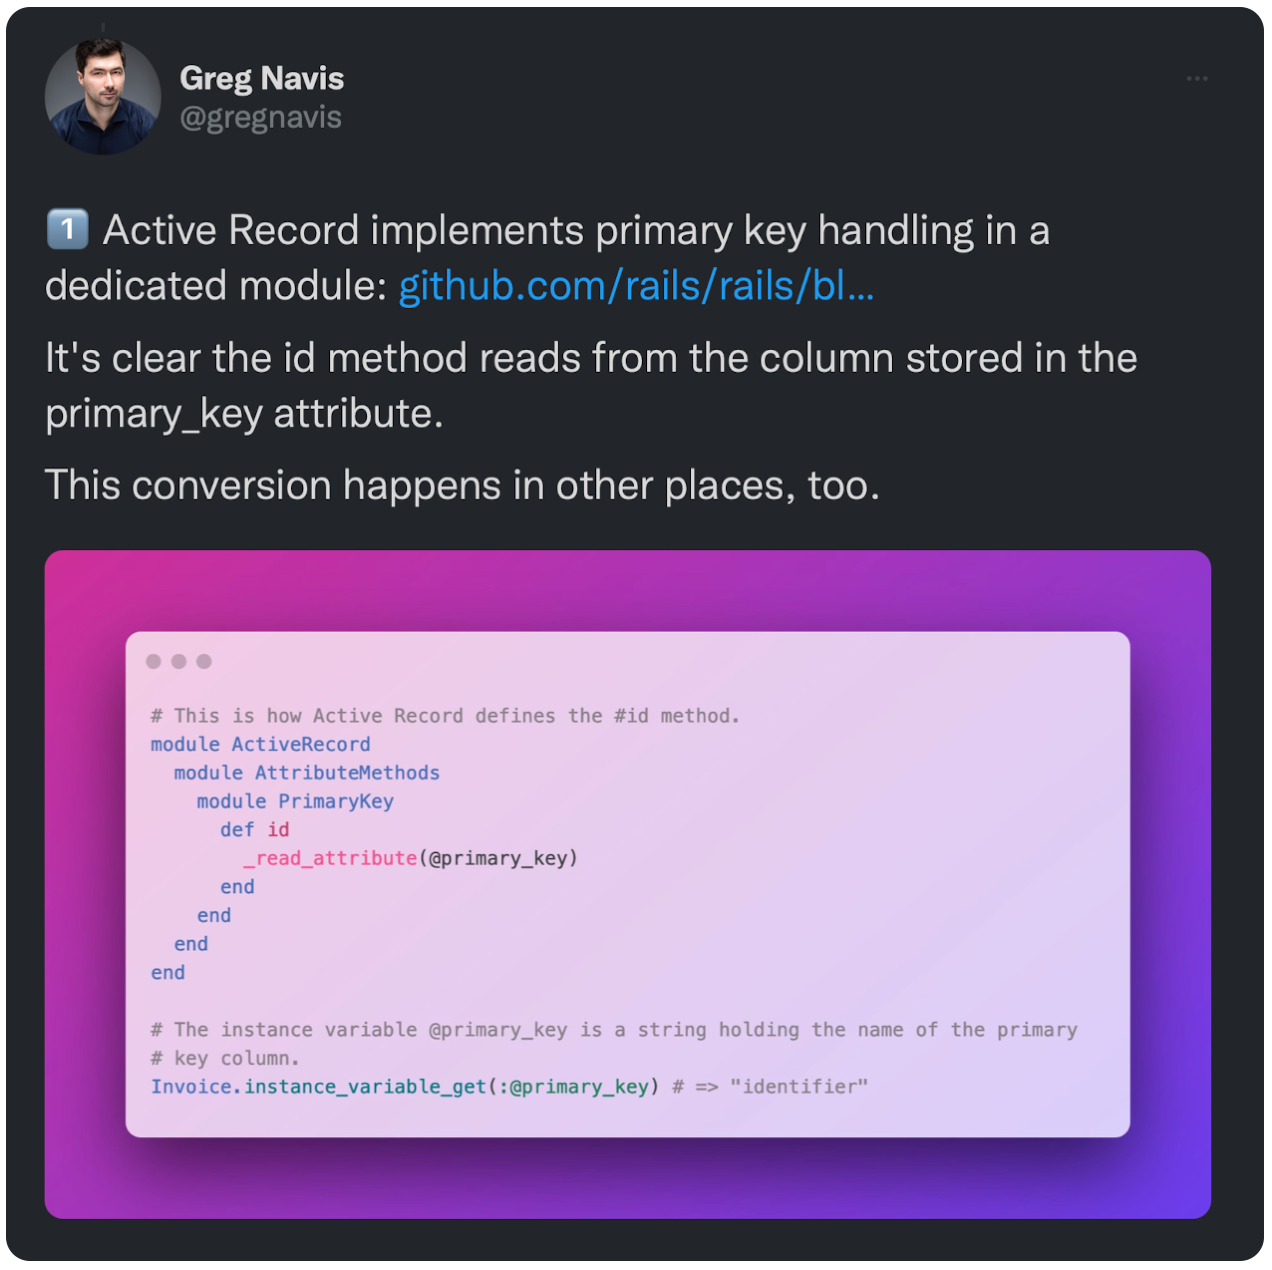 1️⃣ Active Record implements primary key handling in a dedicated module: github.com/rails/rails/bl…  It's clear the id method reads from the column stored in the primary_key attribute.  This conversion happens in other places, too.